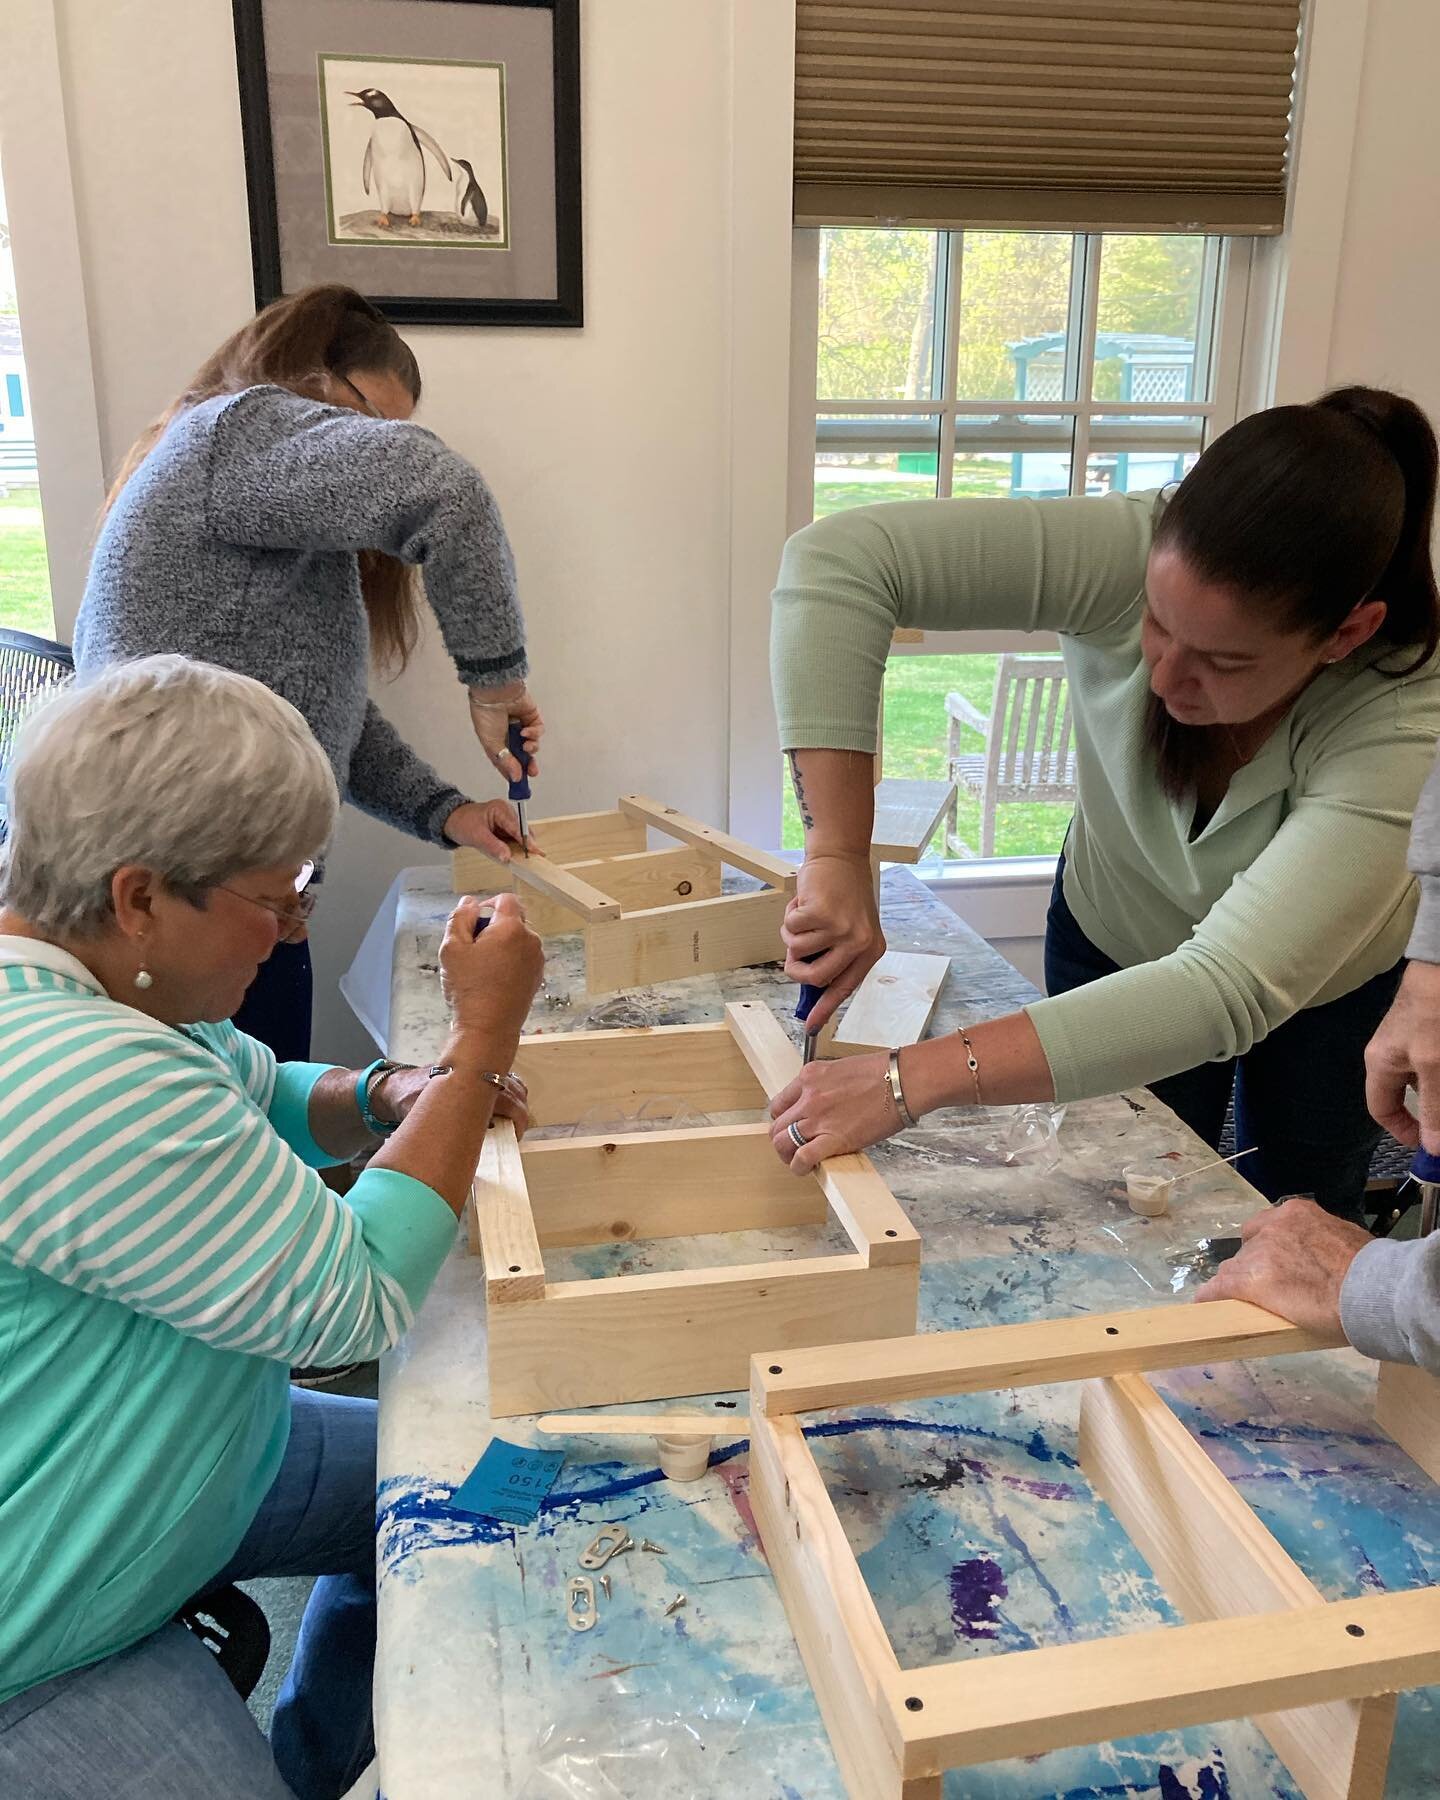 We kicked off May with Woodworking Wednesday&rsquo;s at @brookhavenfreelibrary. I love this kind and caring community. We all worked together to create these beautiful hanging shelves. Can&rsquo;t wait to see where they will live. We are already two 